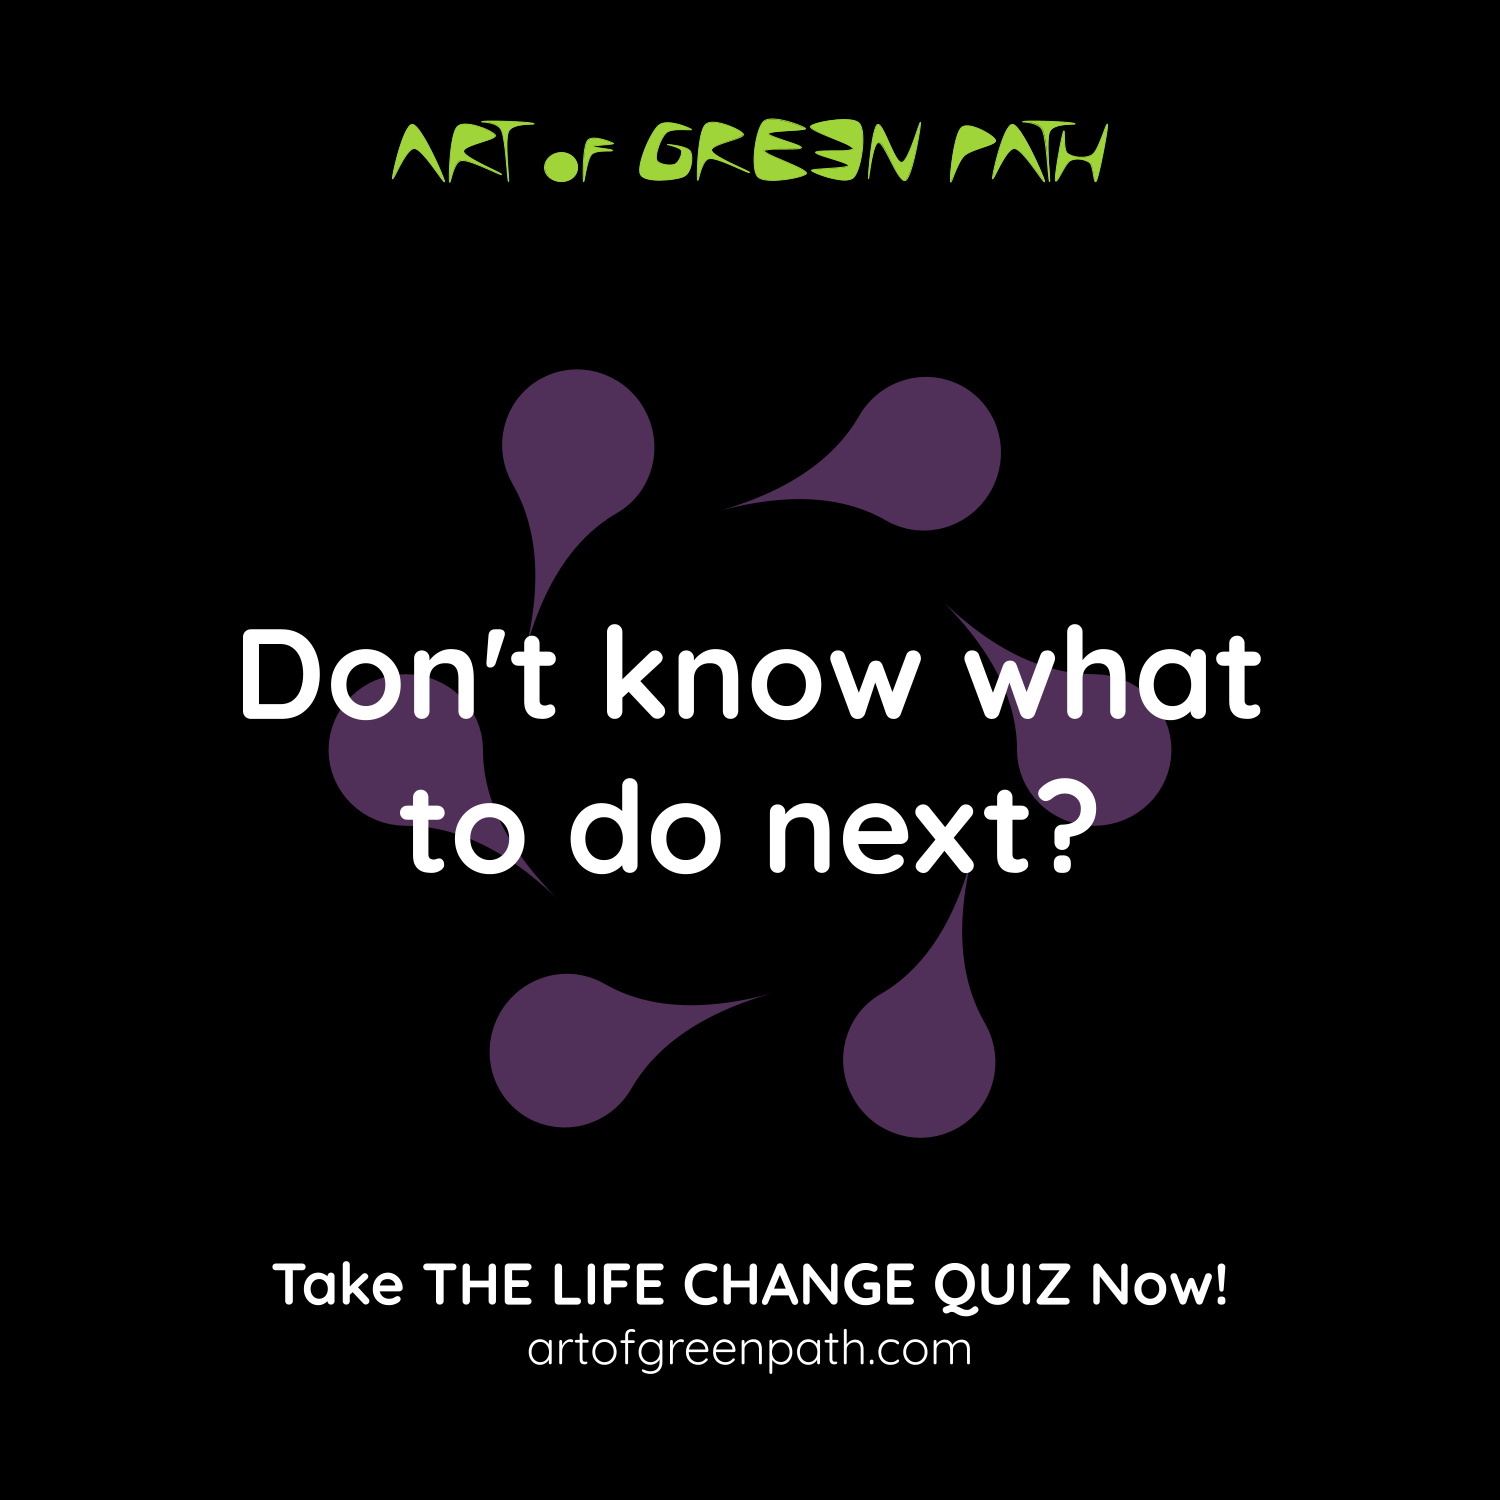 The Life Change Quiz 01 Don't know what to do next - Art Of Green Path